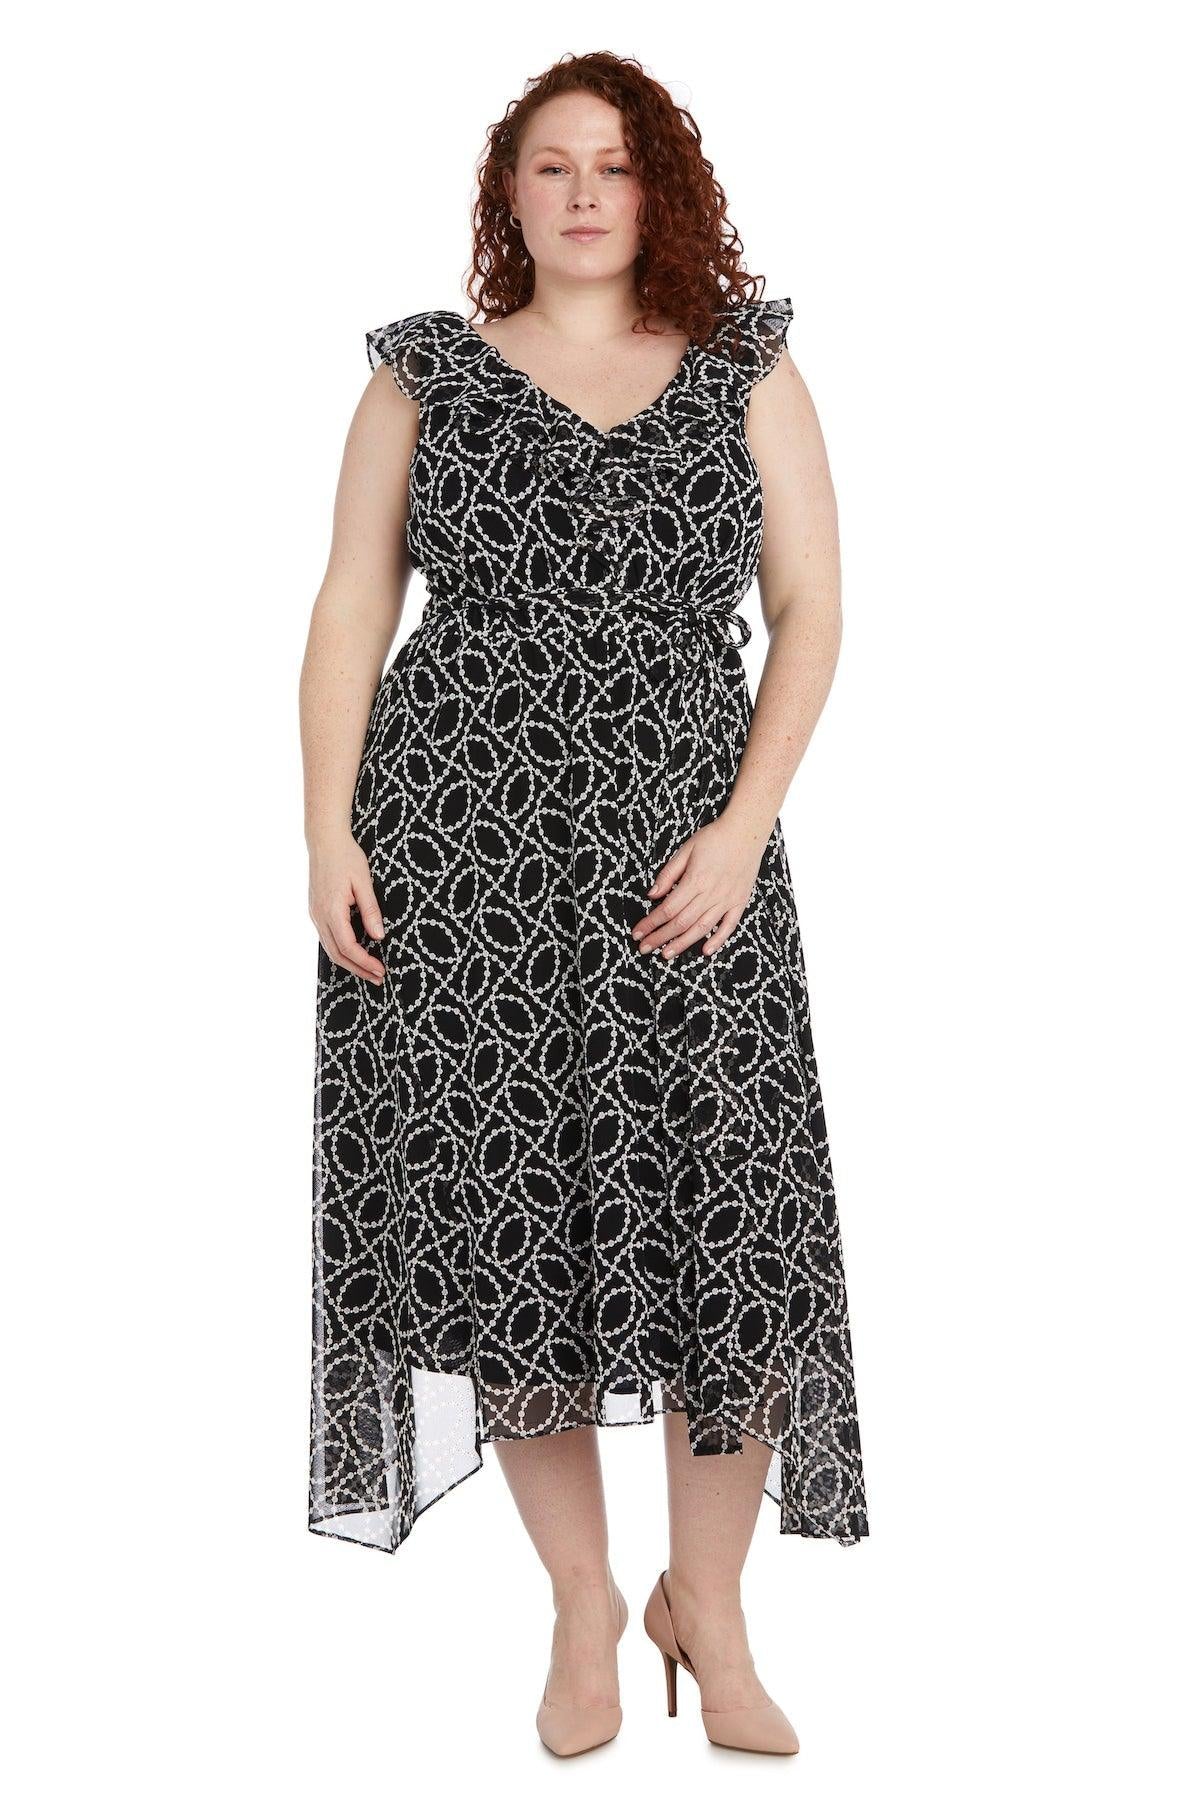 R&M Richards Plus Size High Low Ruffle Dress 9364W - The Dress Outlet